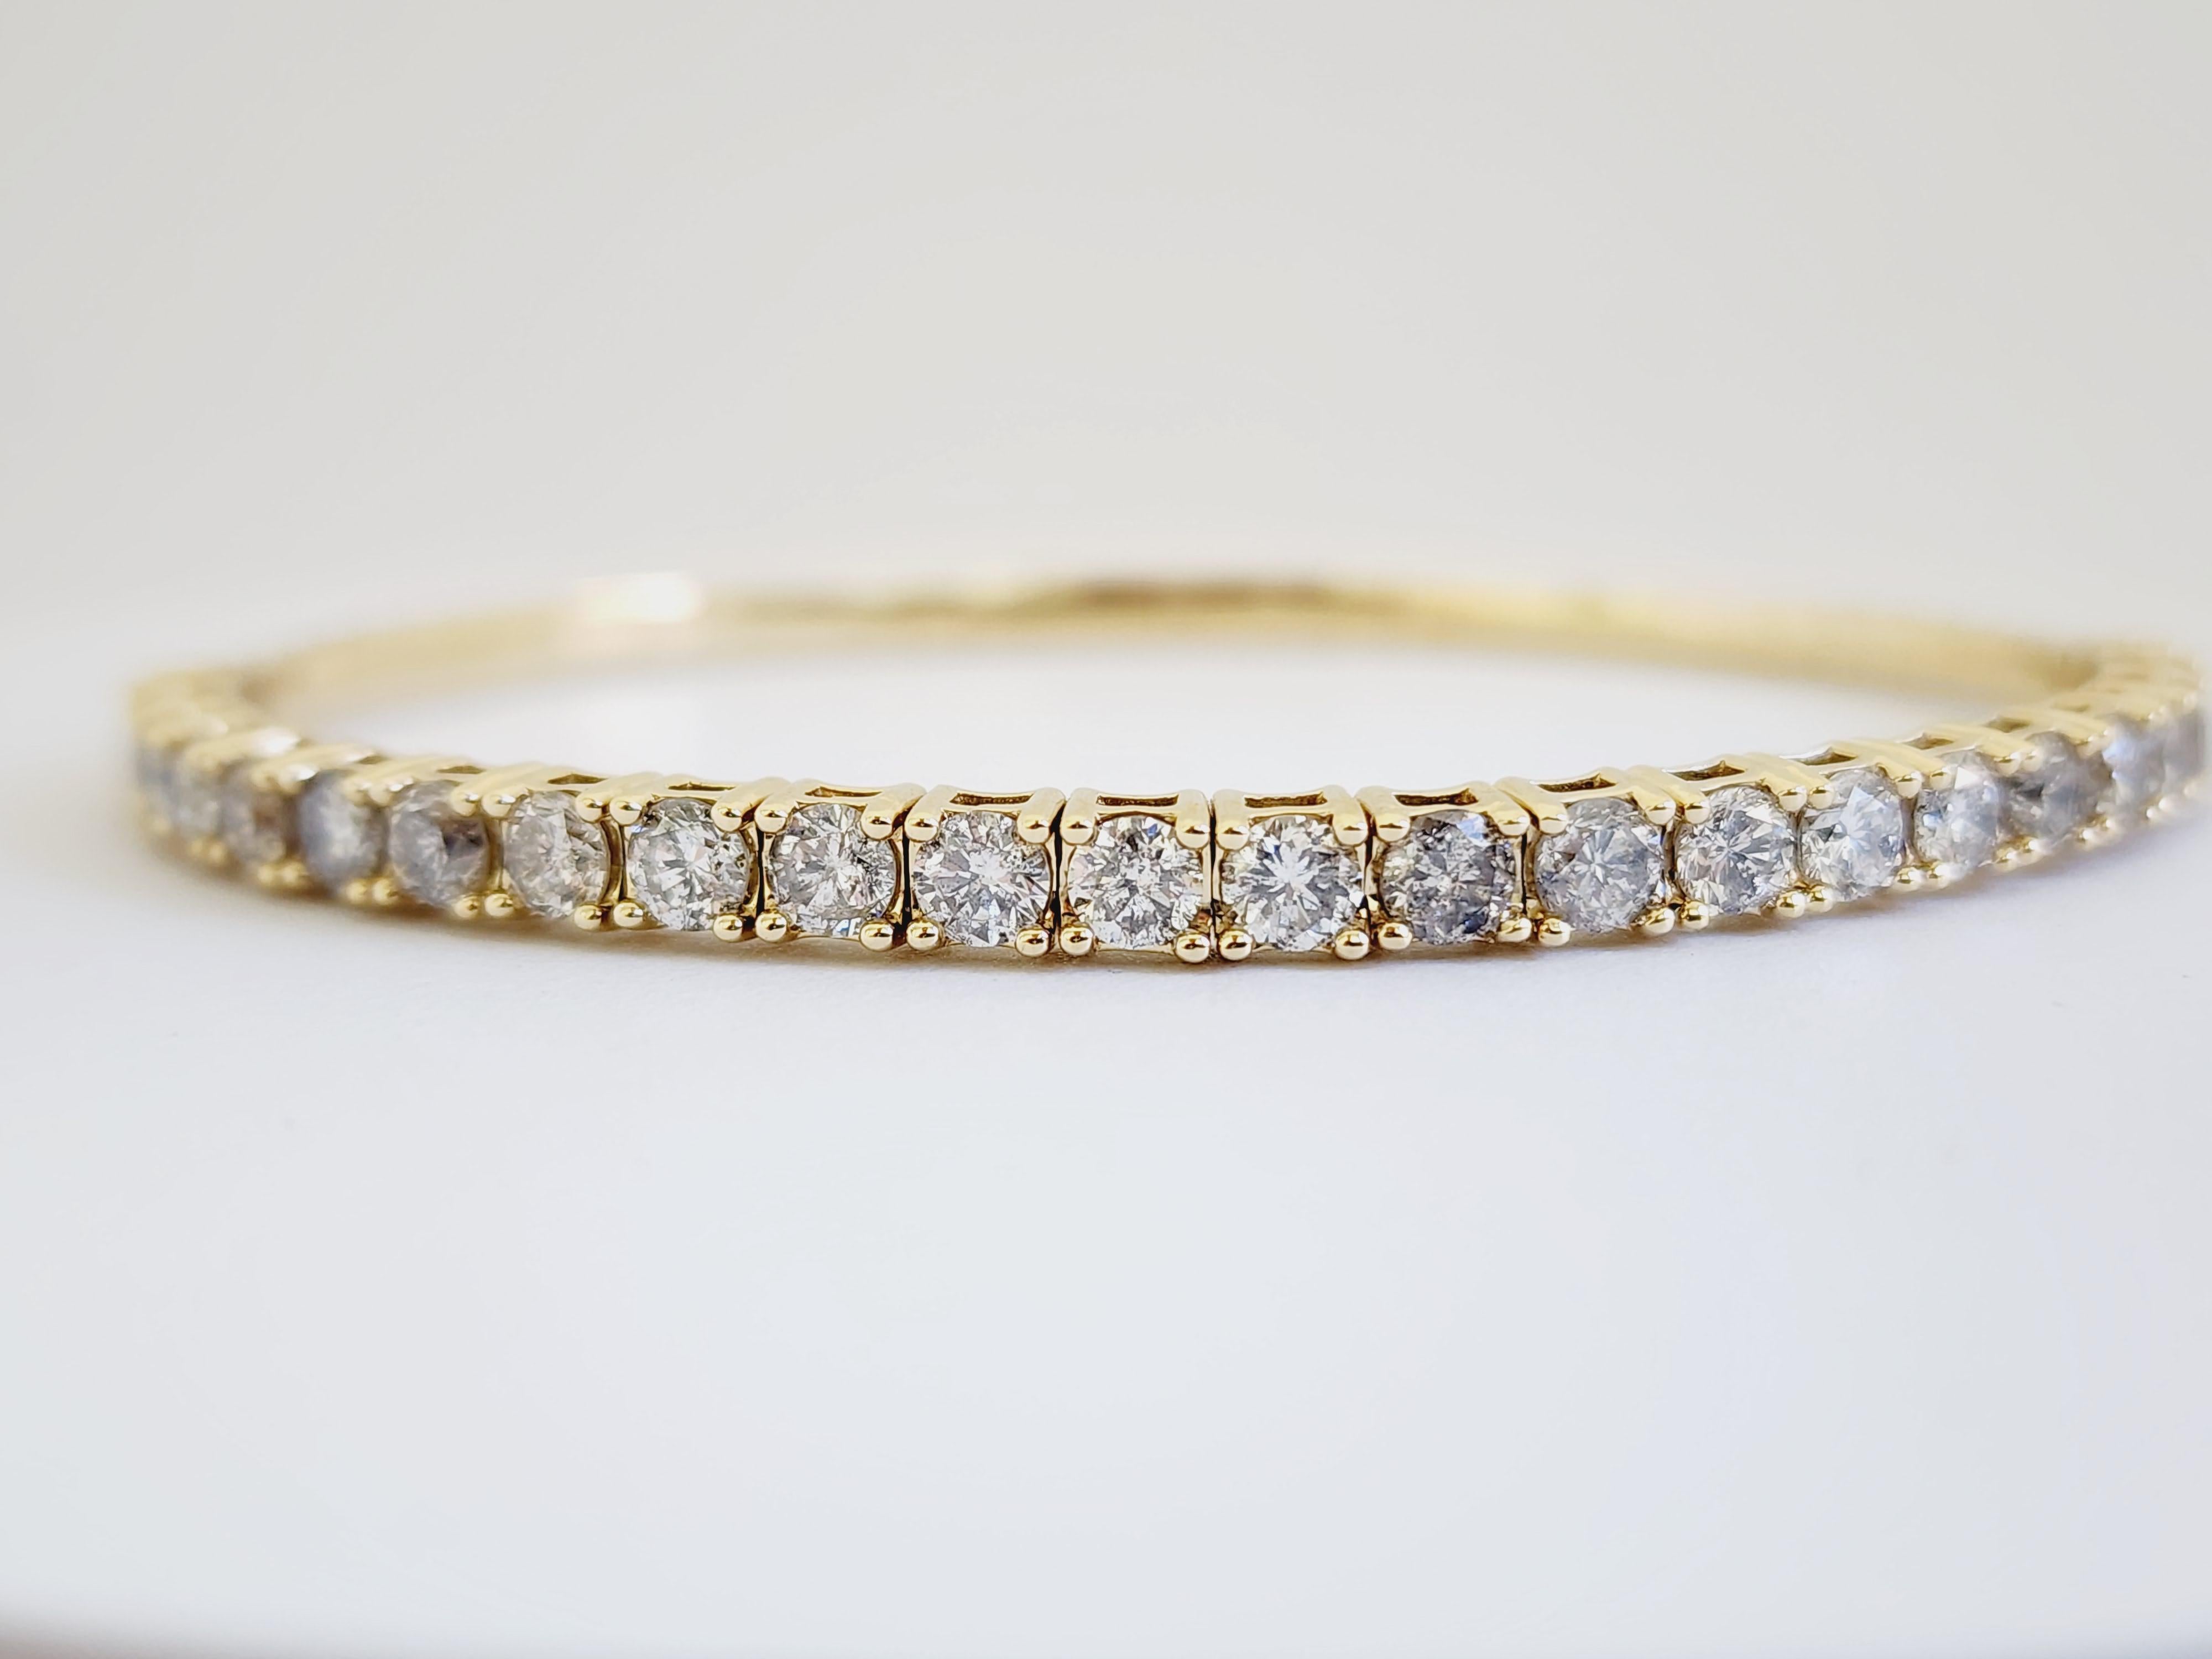 Natural Diamonds 3.73 ctw flexible halfway around bangle yellow gold 14k.
Average Color F Clarity I, 3.80 mm wide.  7 Inch. 